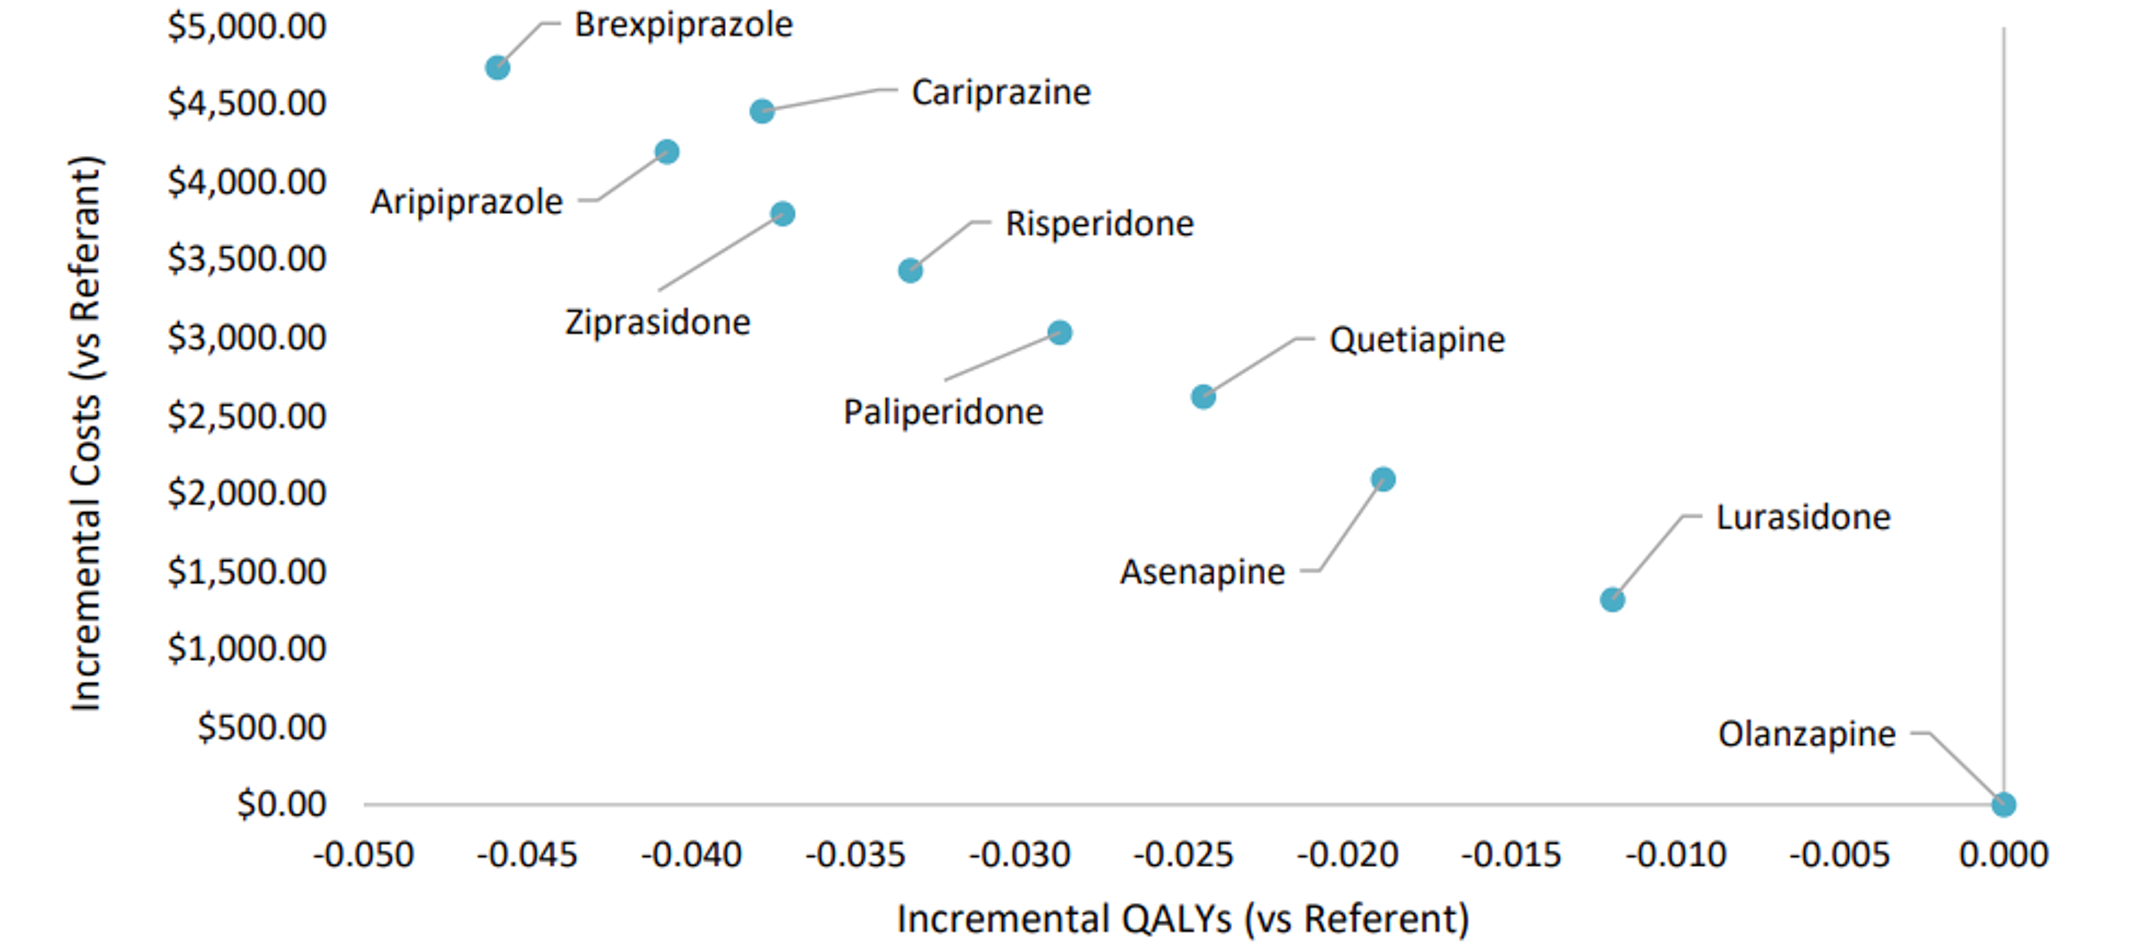 Scatterplot chart listing the incremental cost and incremental QALYs of each treatment compared with olanzapine. All treatments result in negative incremental QALYs (–0.010 to –0.050), and the incremental costs ranged from $1,500 for lurasidone to more than $4,500 for brexpiprazole.